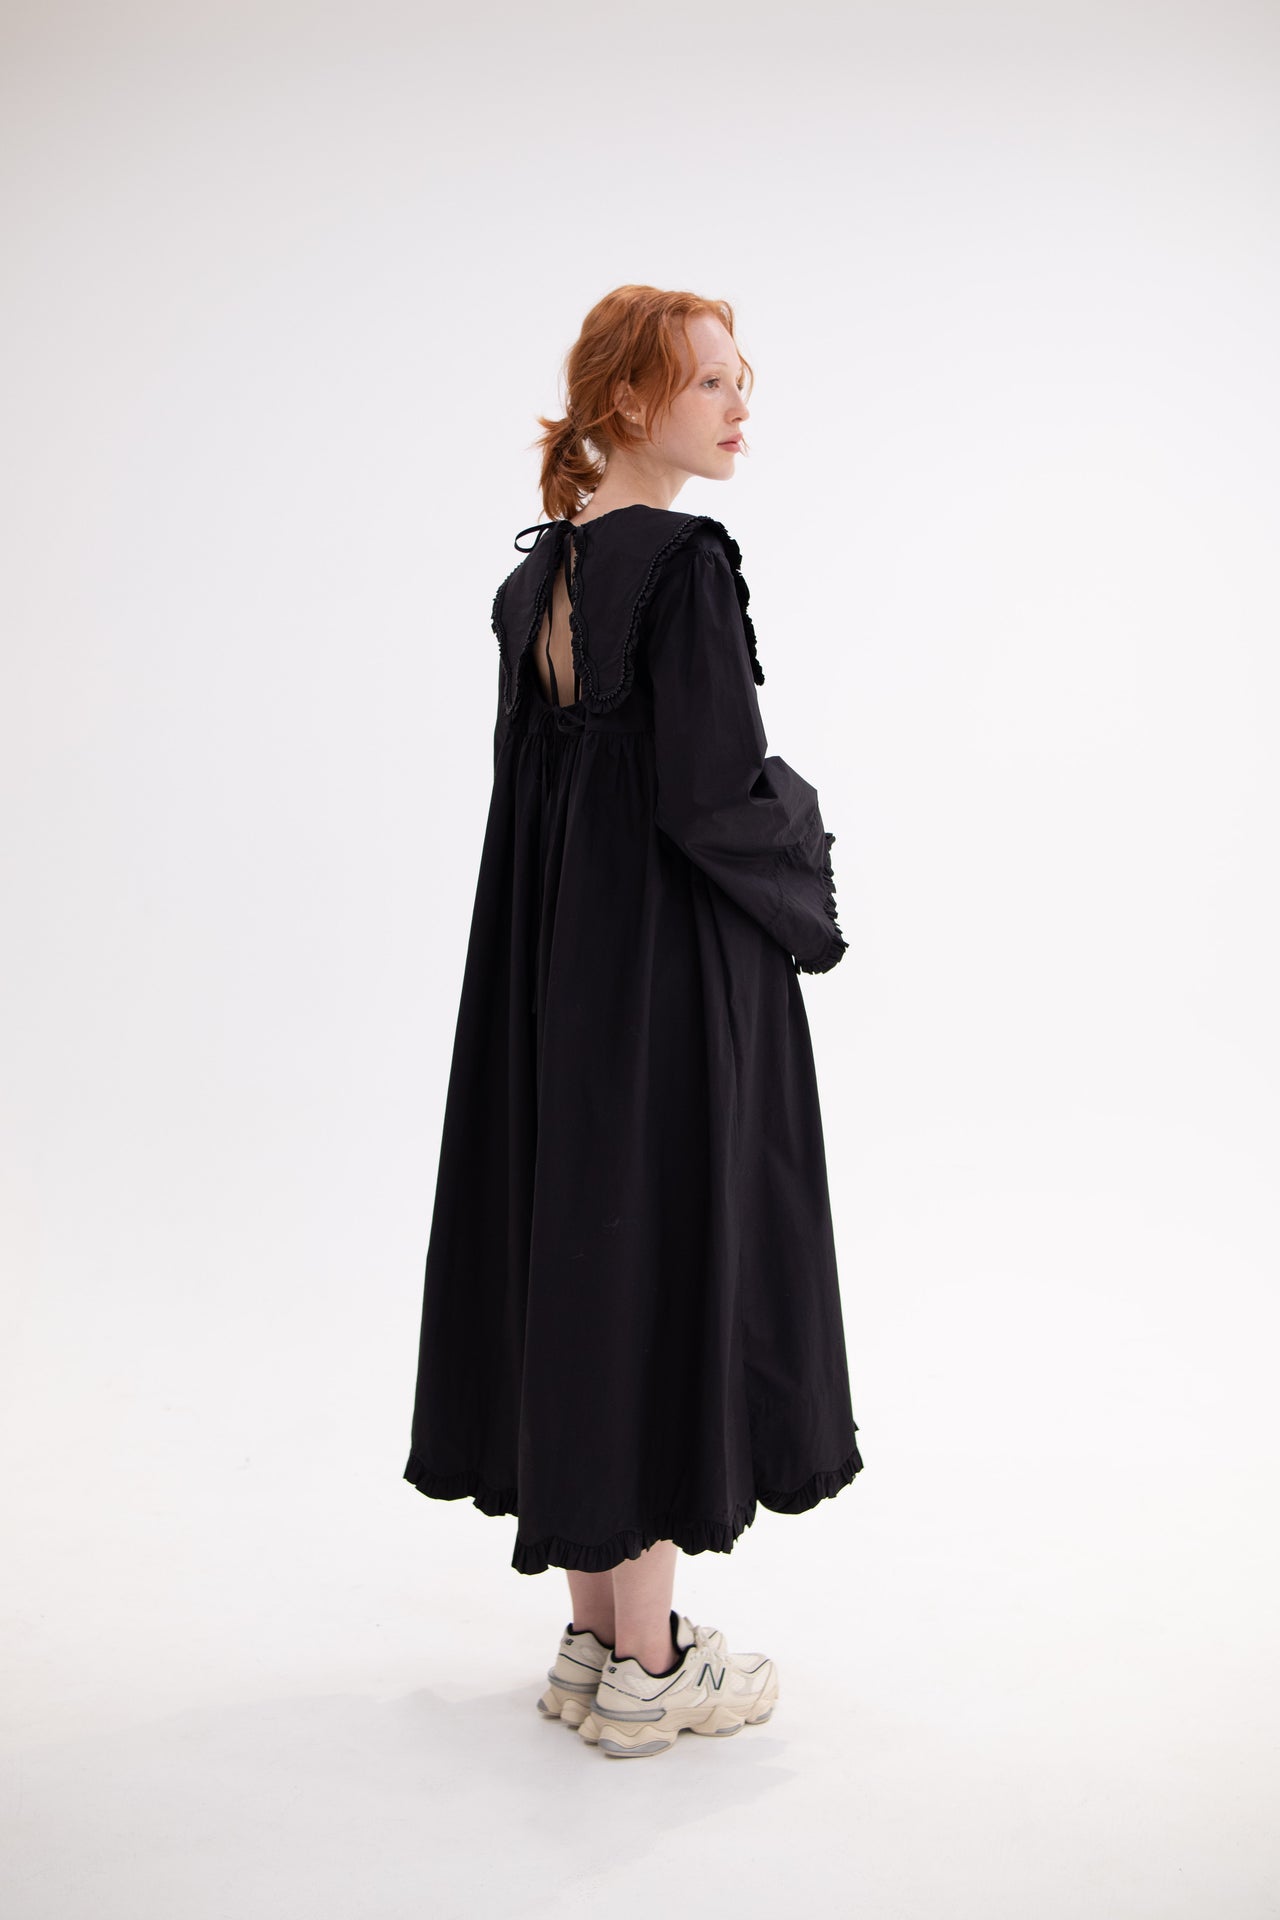 Roco black - sleepwear and everyday dress with a large collar with scalloped edges and gathered frills